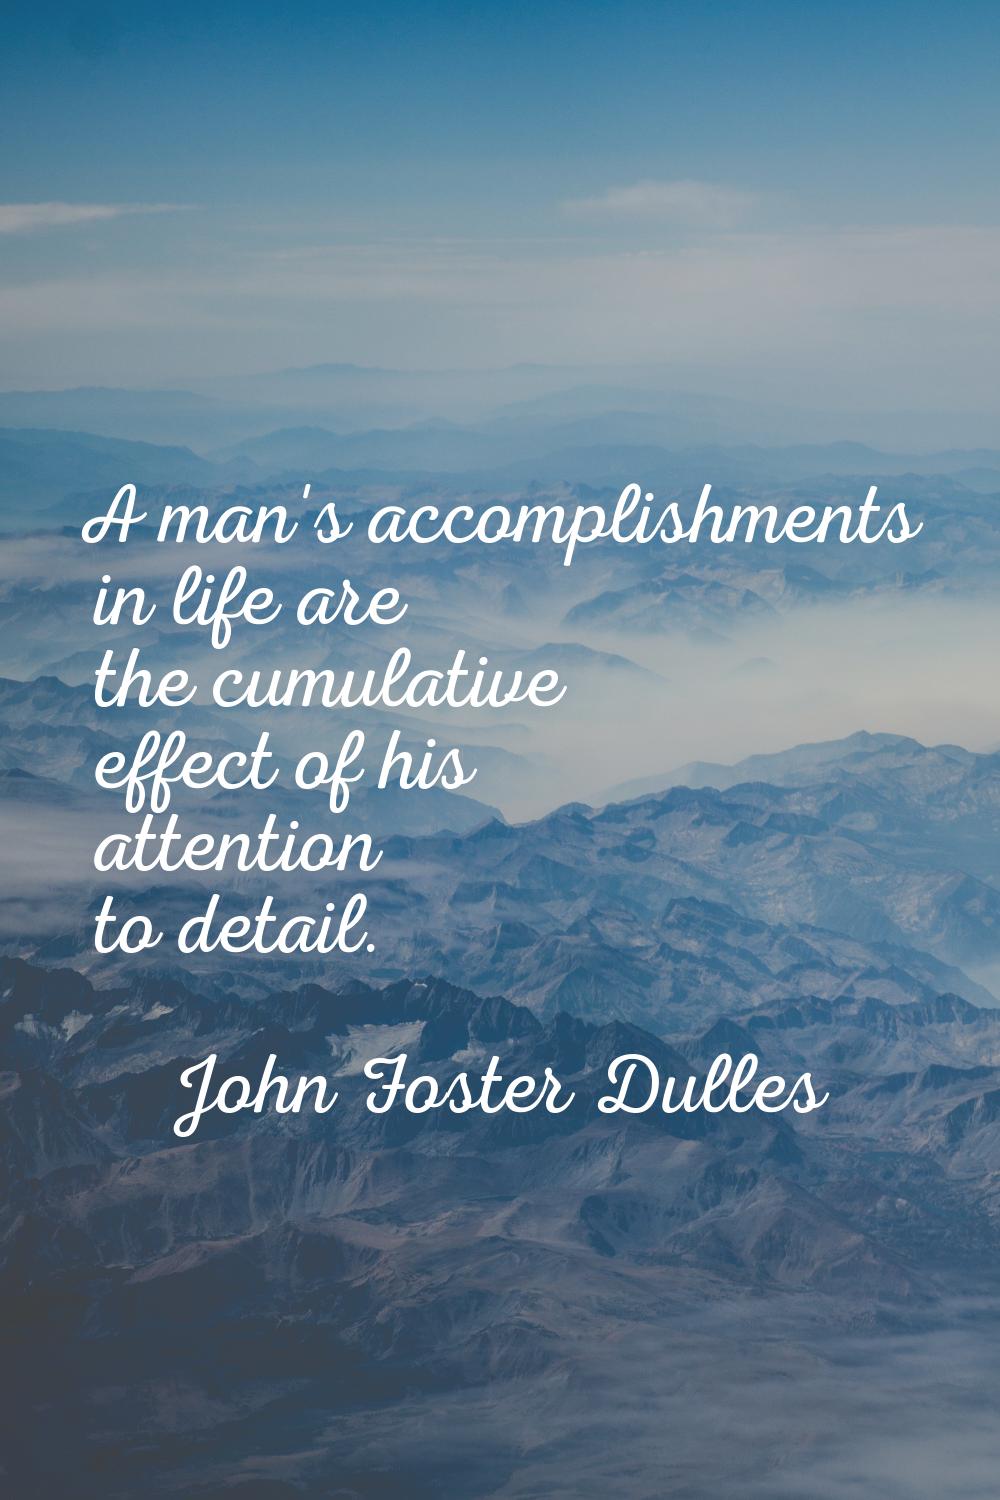 A man's accomplishments in life are the cumulative effect of his attention to detail.